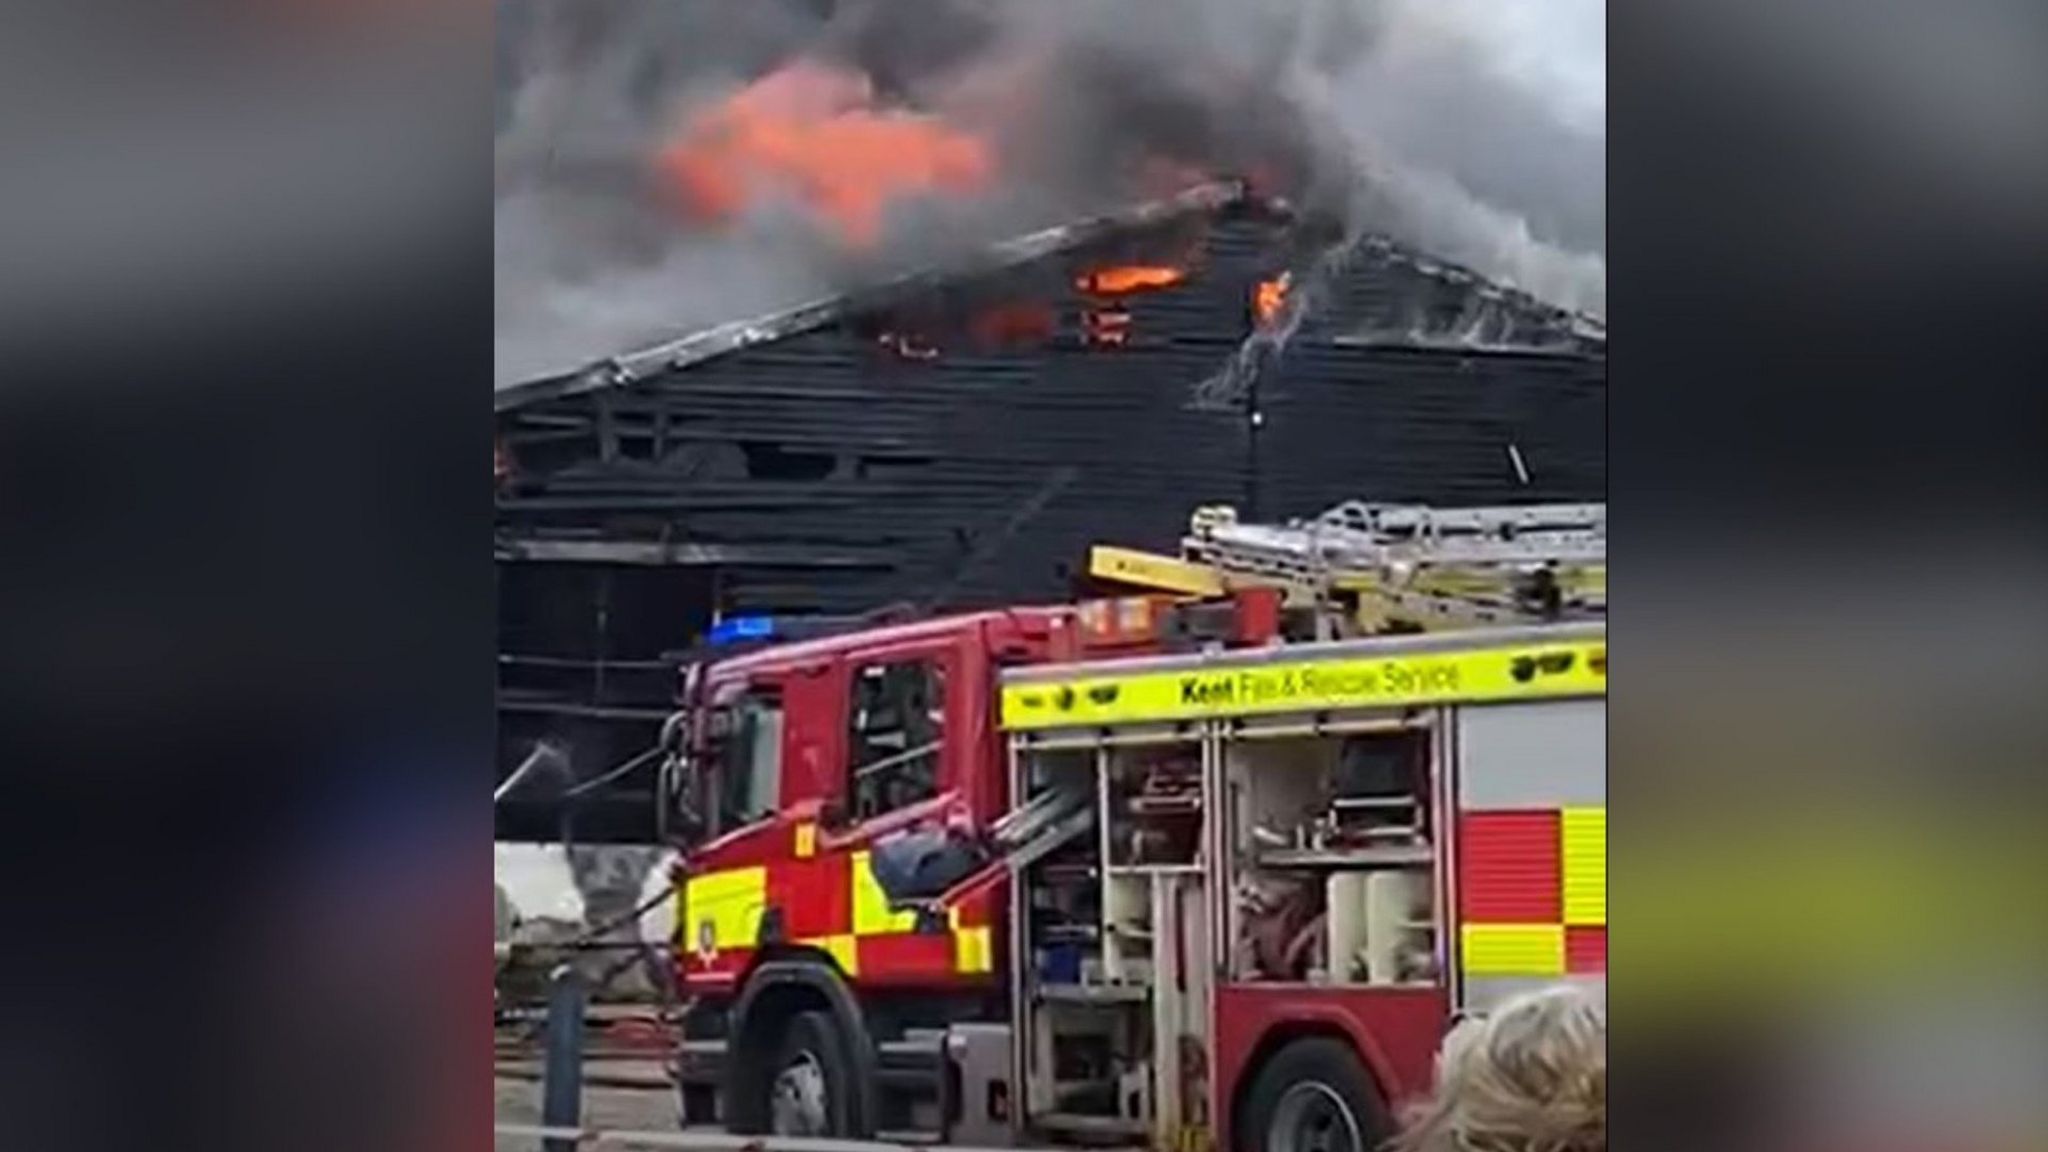 A fire engine dealing with a commercial fire in a black wooden building